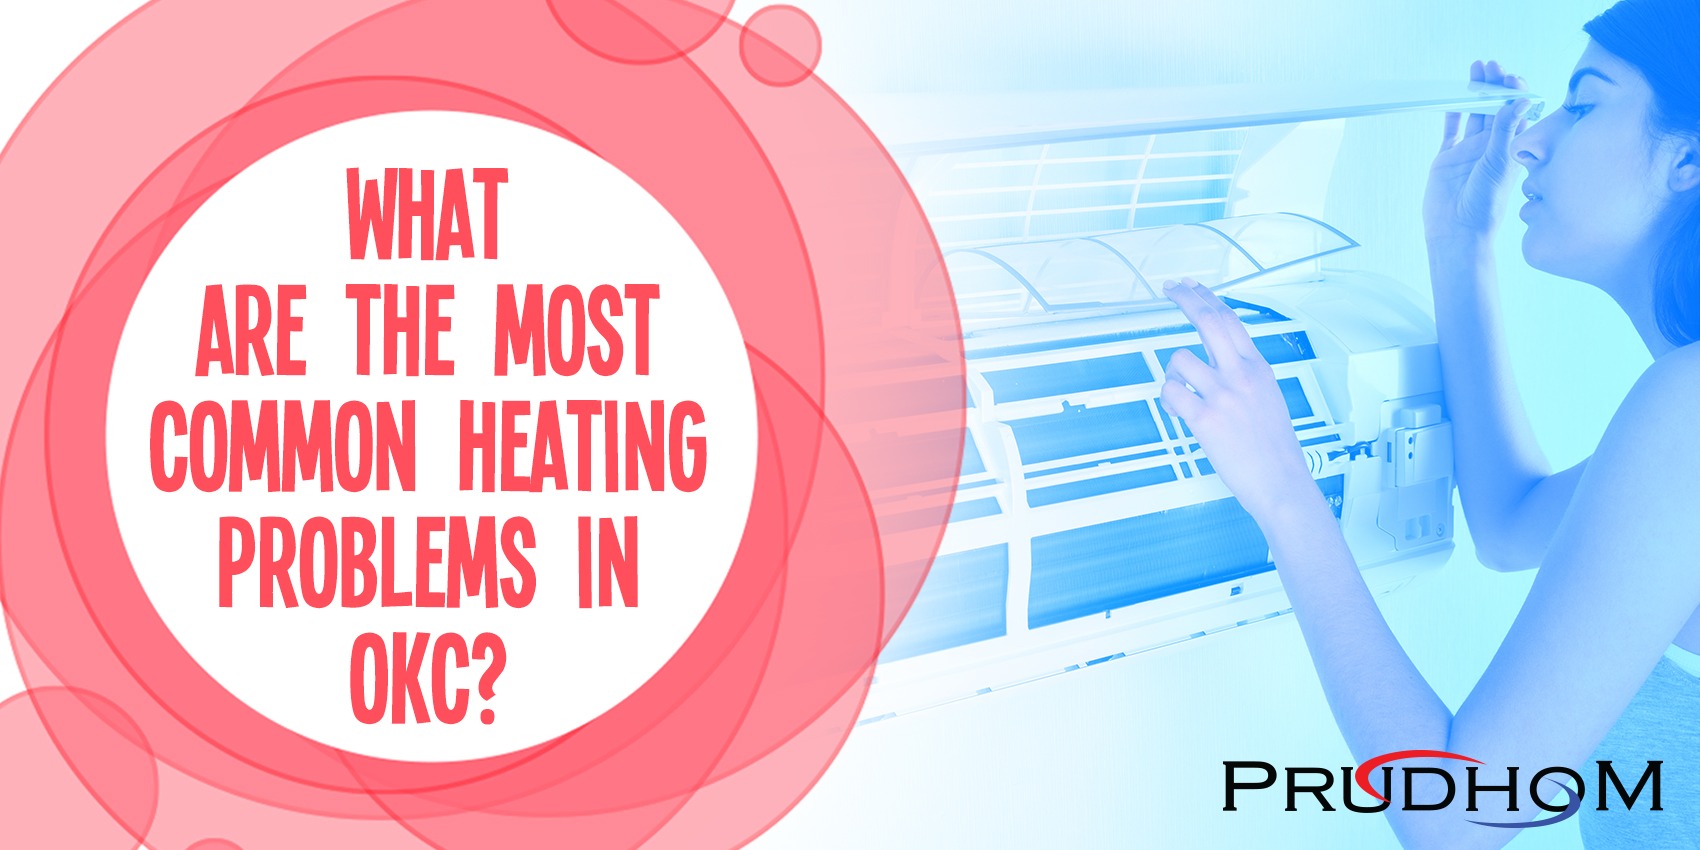 What Are The Most Common Heating Problems in OKC?